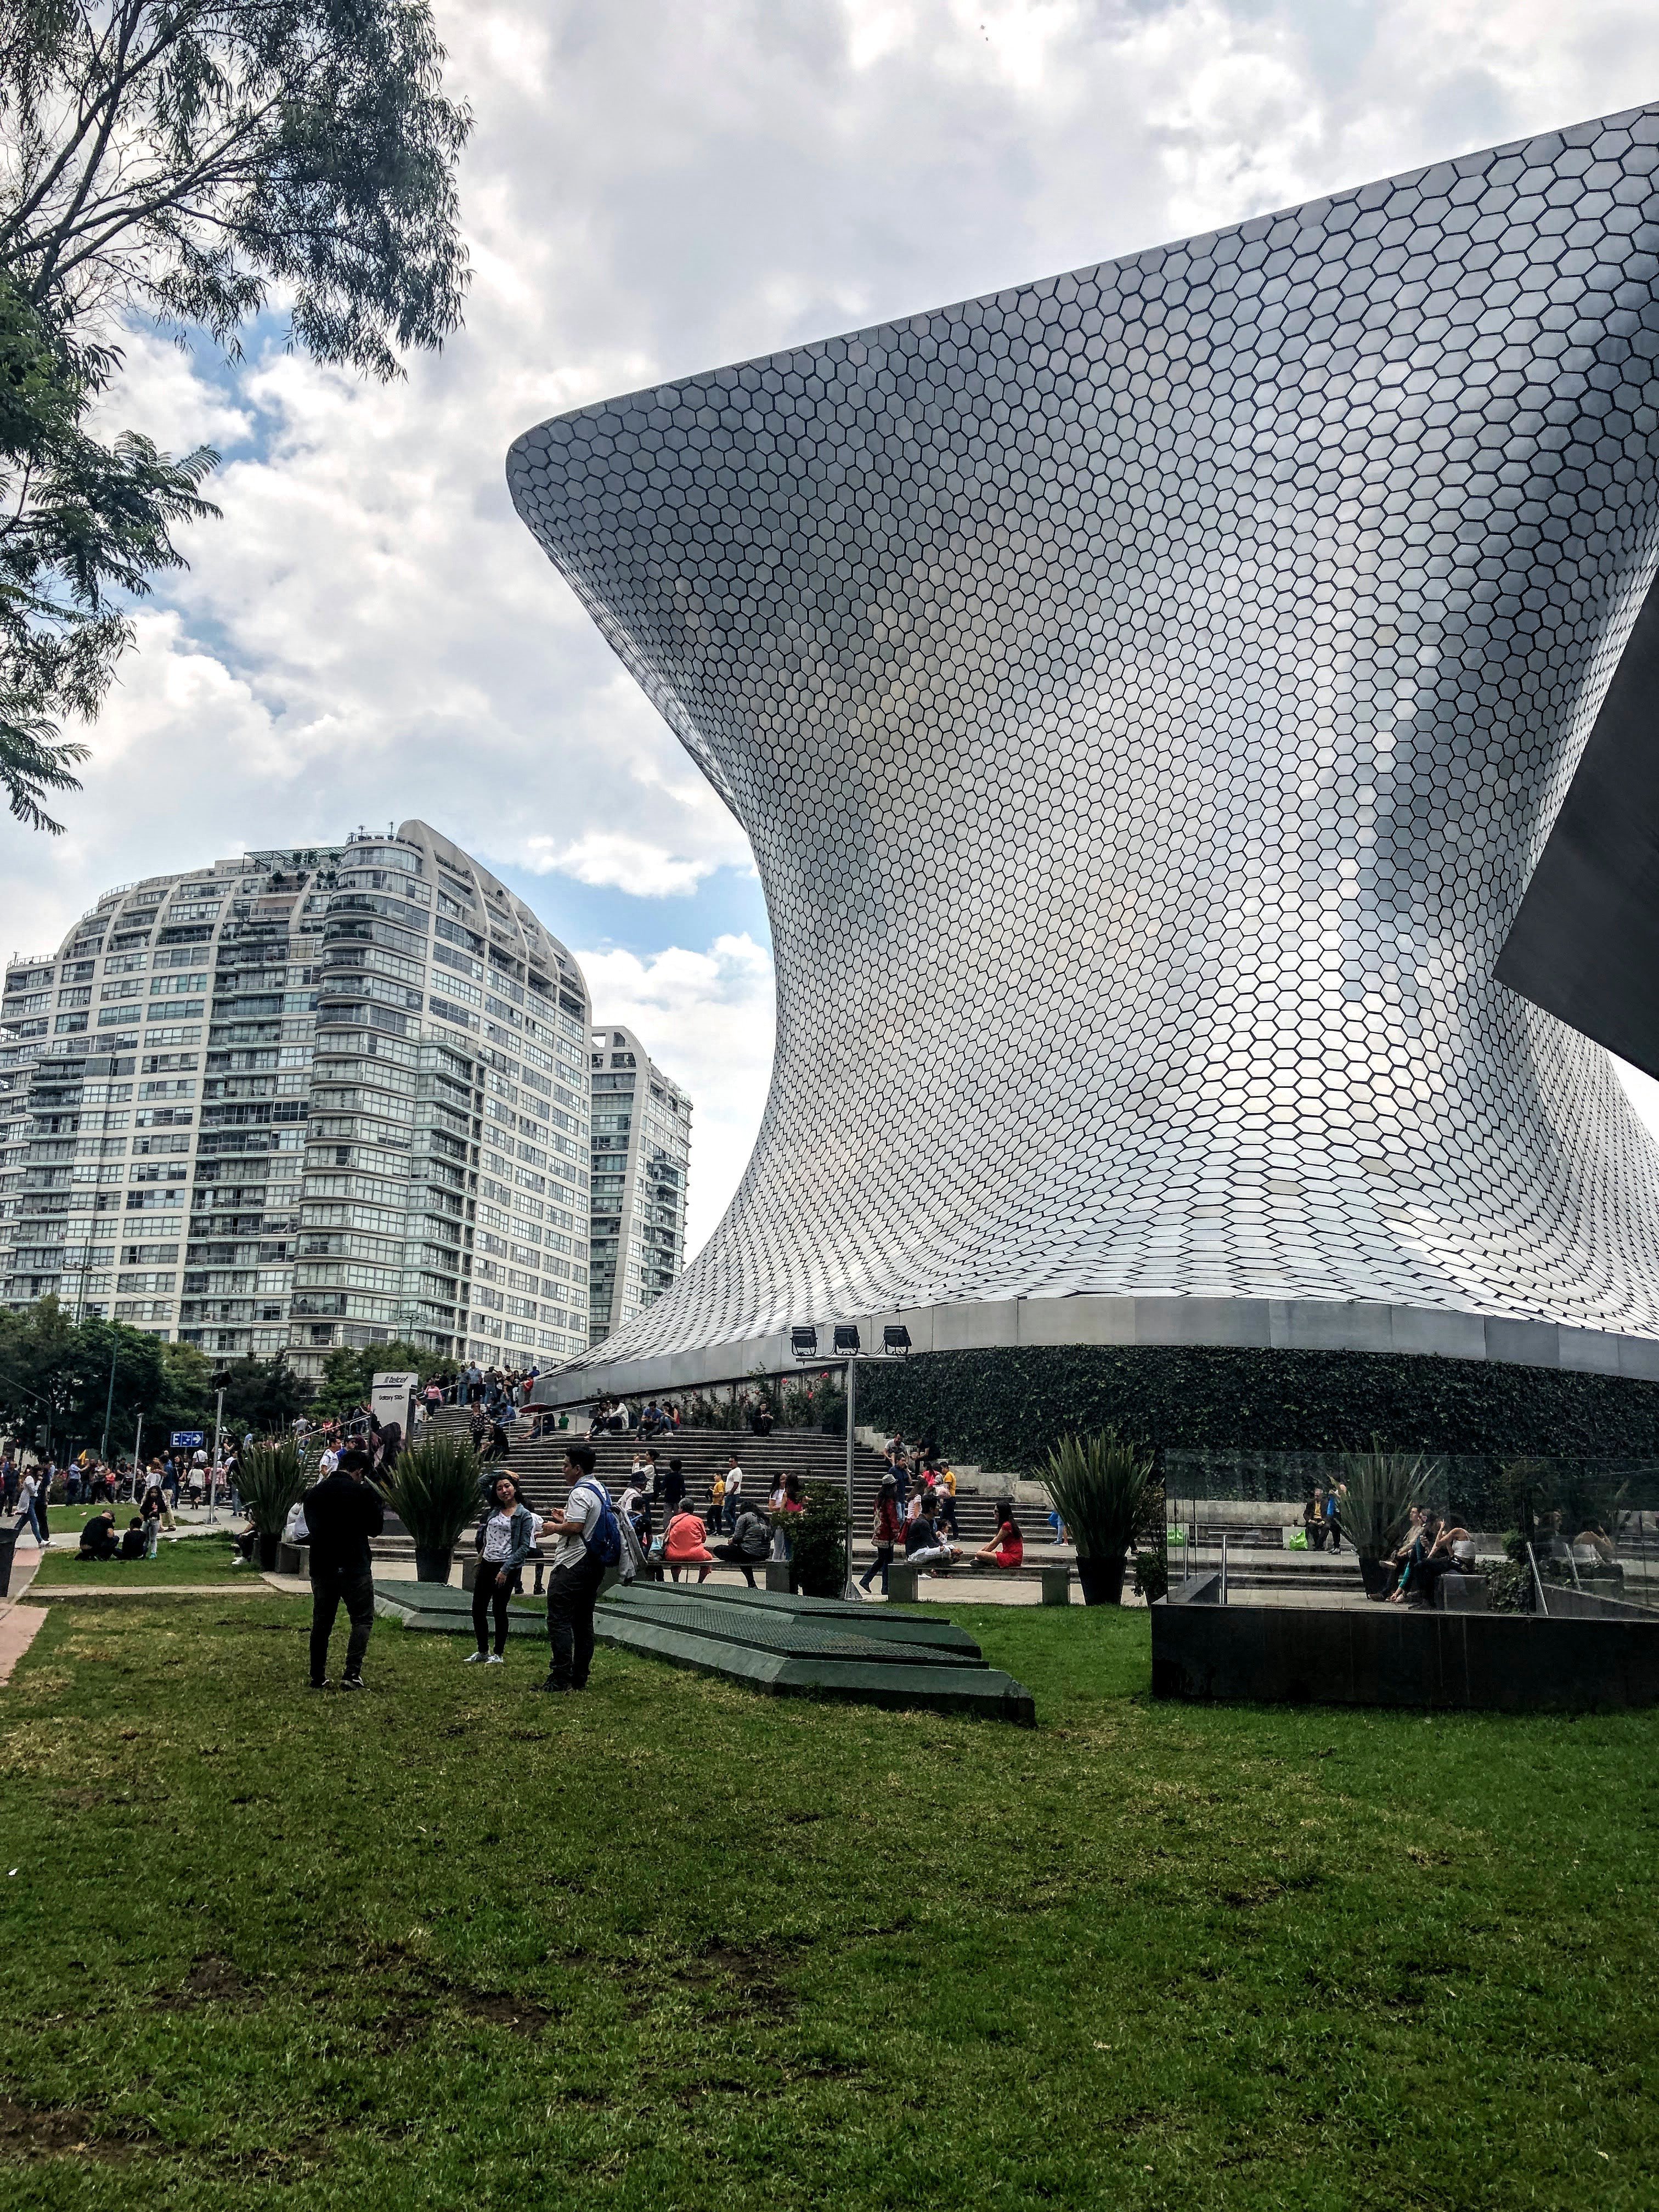 Self-guided walking tour of the Polanco neighbourhood in Mexico City